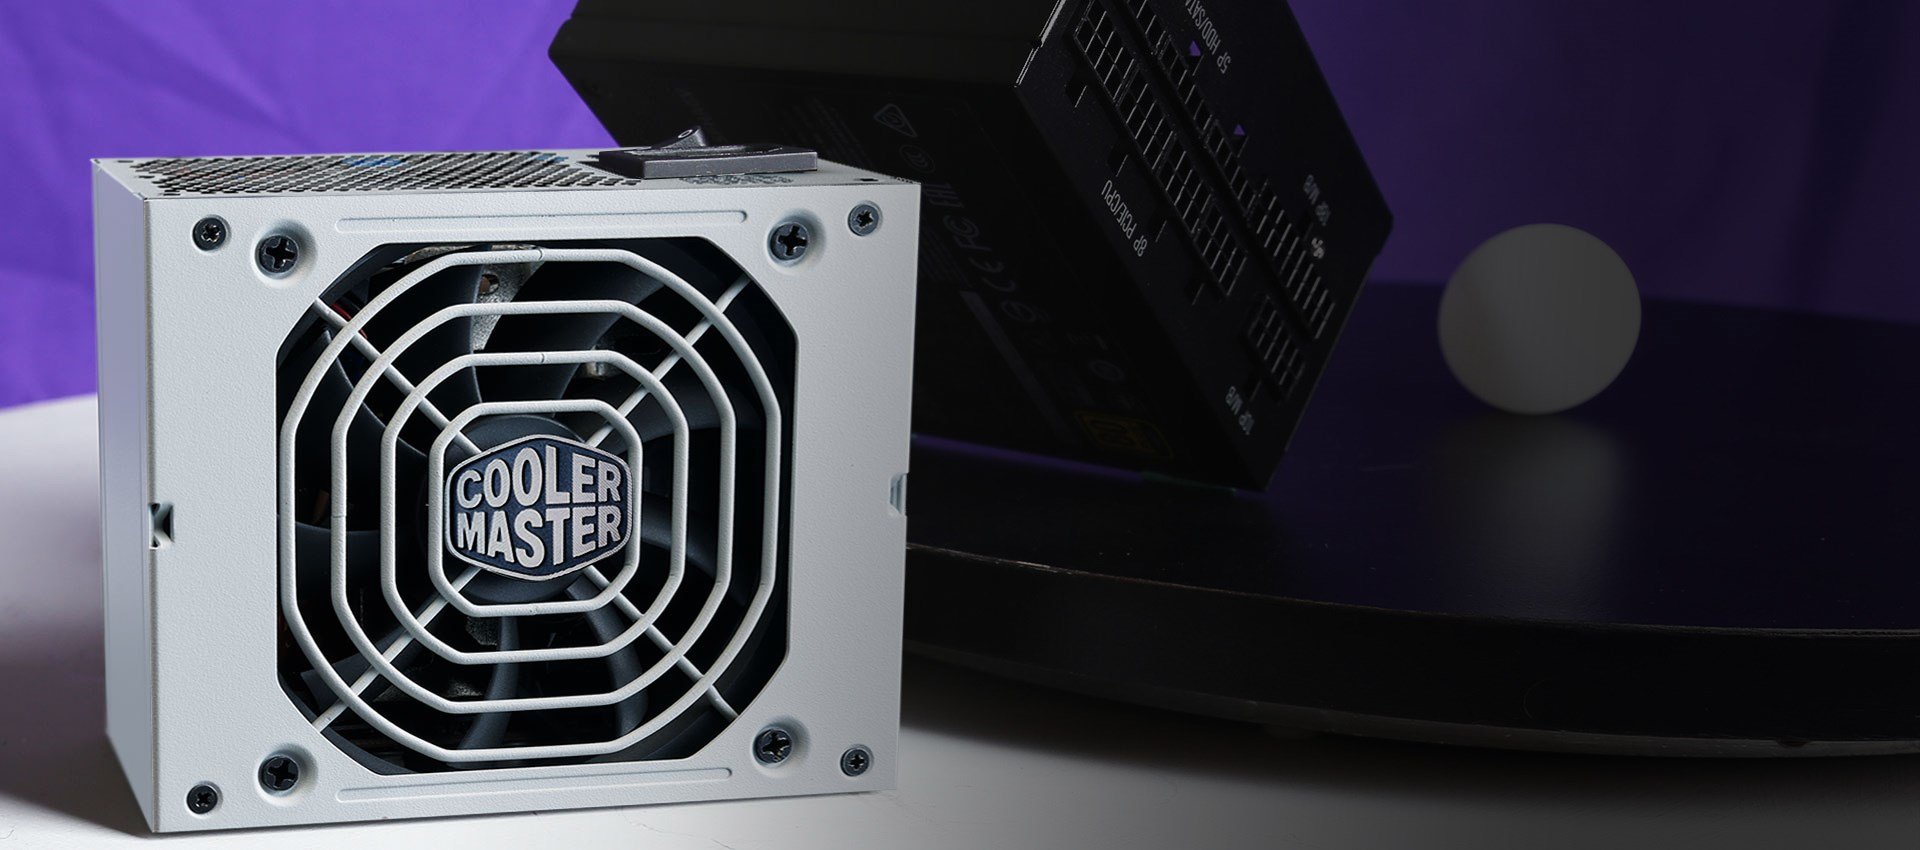 Cooler Master V850 SFX Gold White Edition Full Modular, 850W, 80+ Gold  Efficiency, ATX Bracket Included, Quiet FDB Fan, SFX Form Factor, 10 Year  